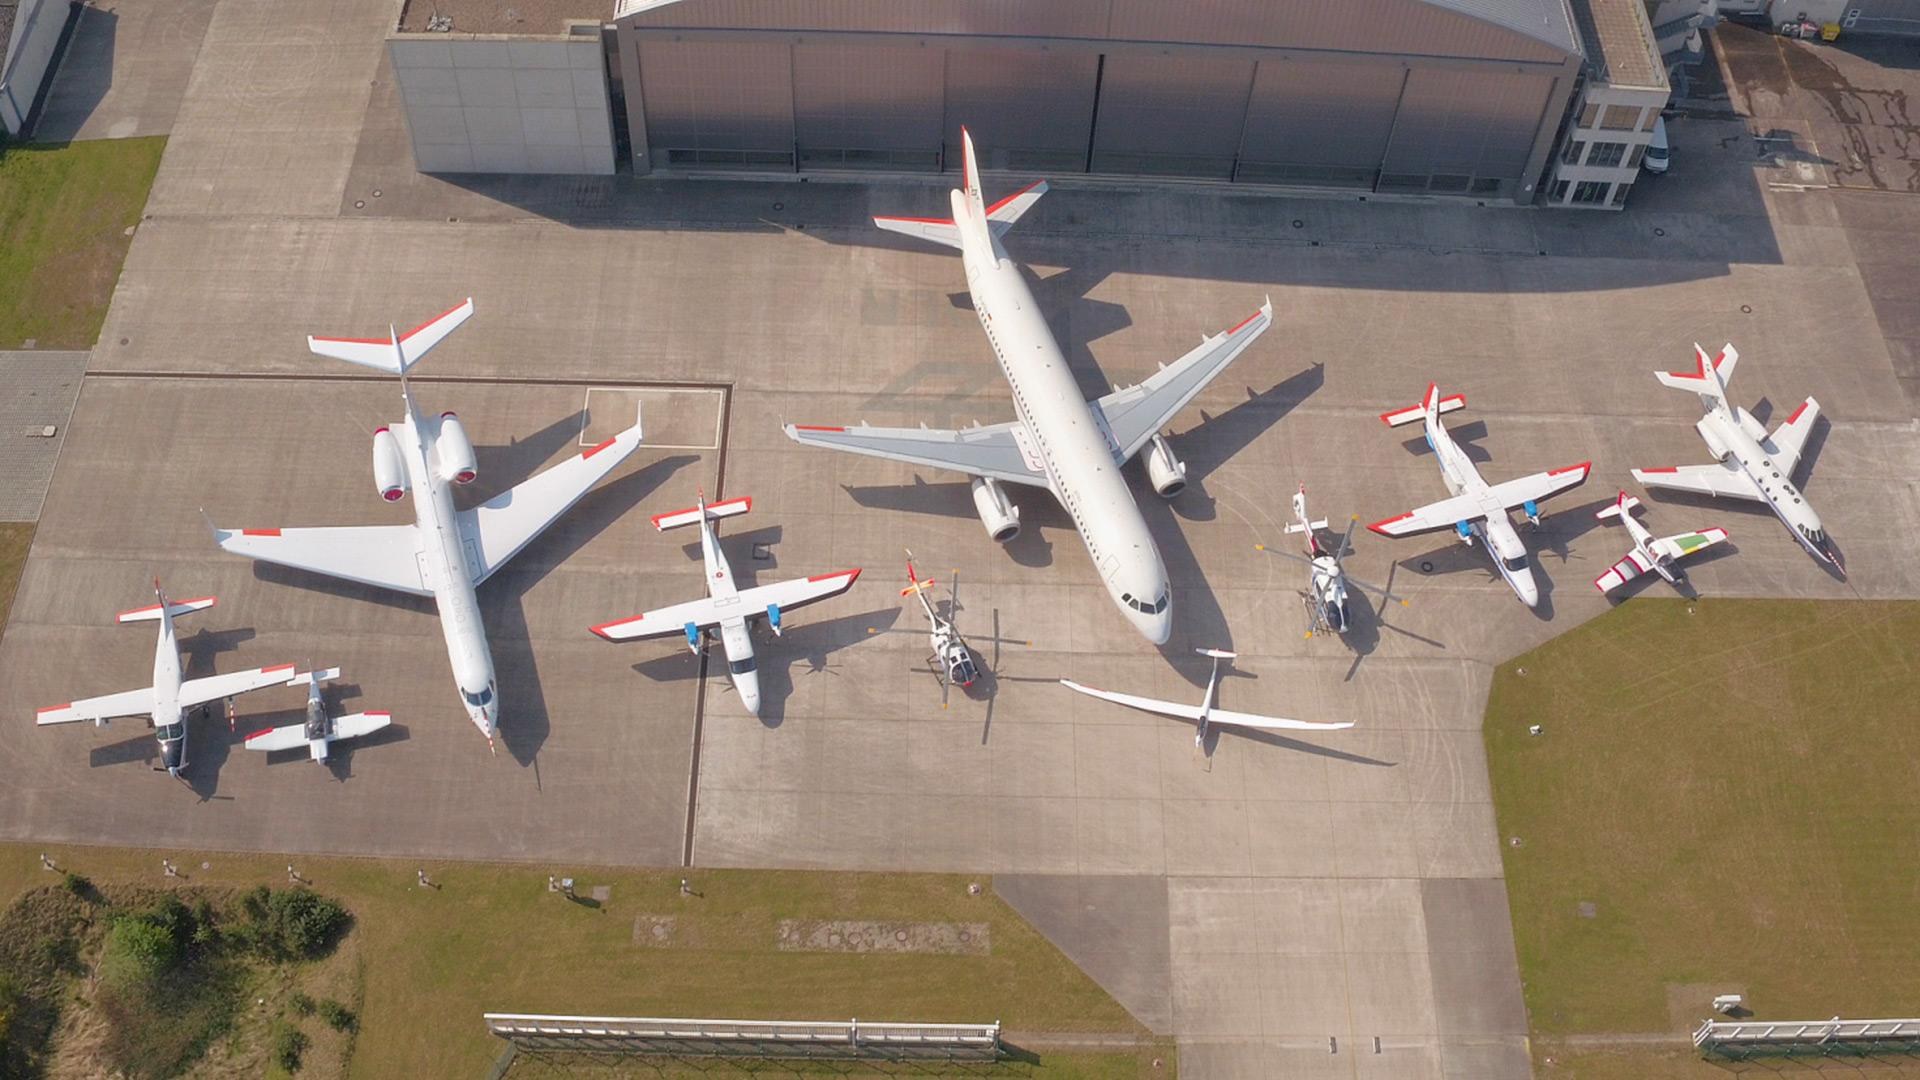 DLR - The DLR fleet of research aircraft at a glance